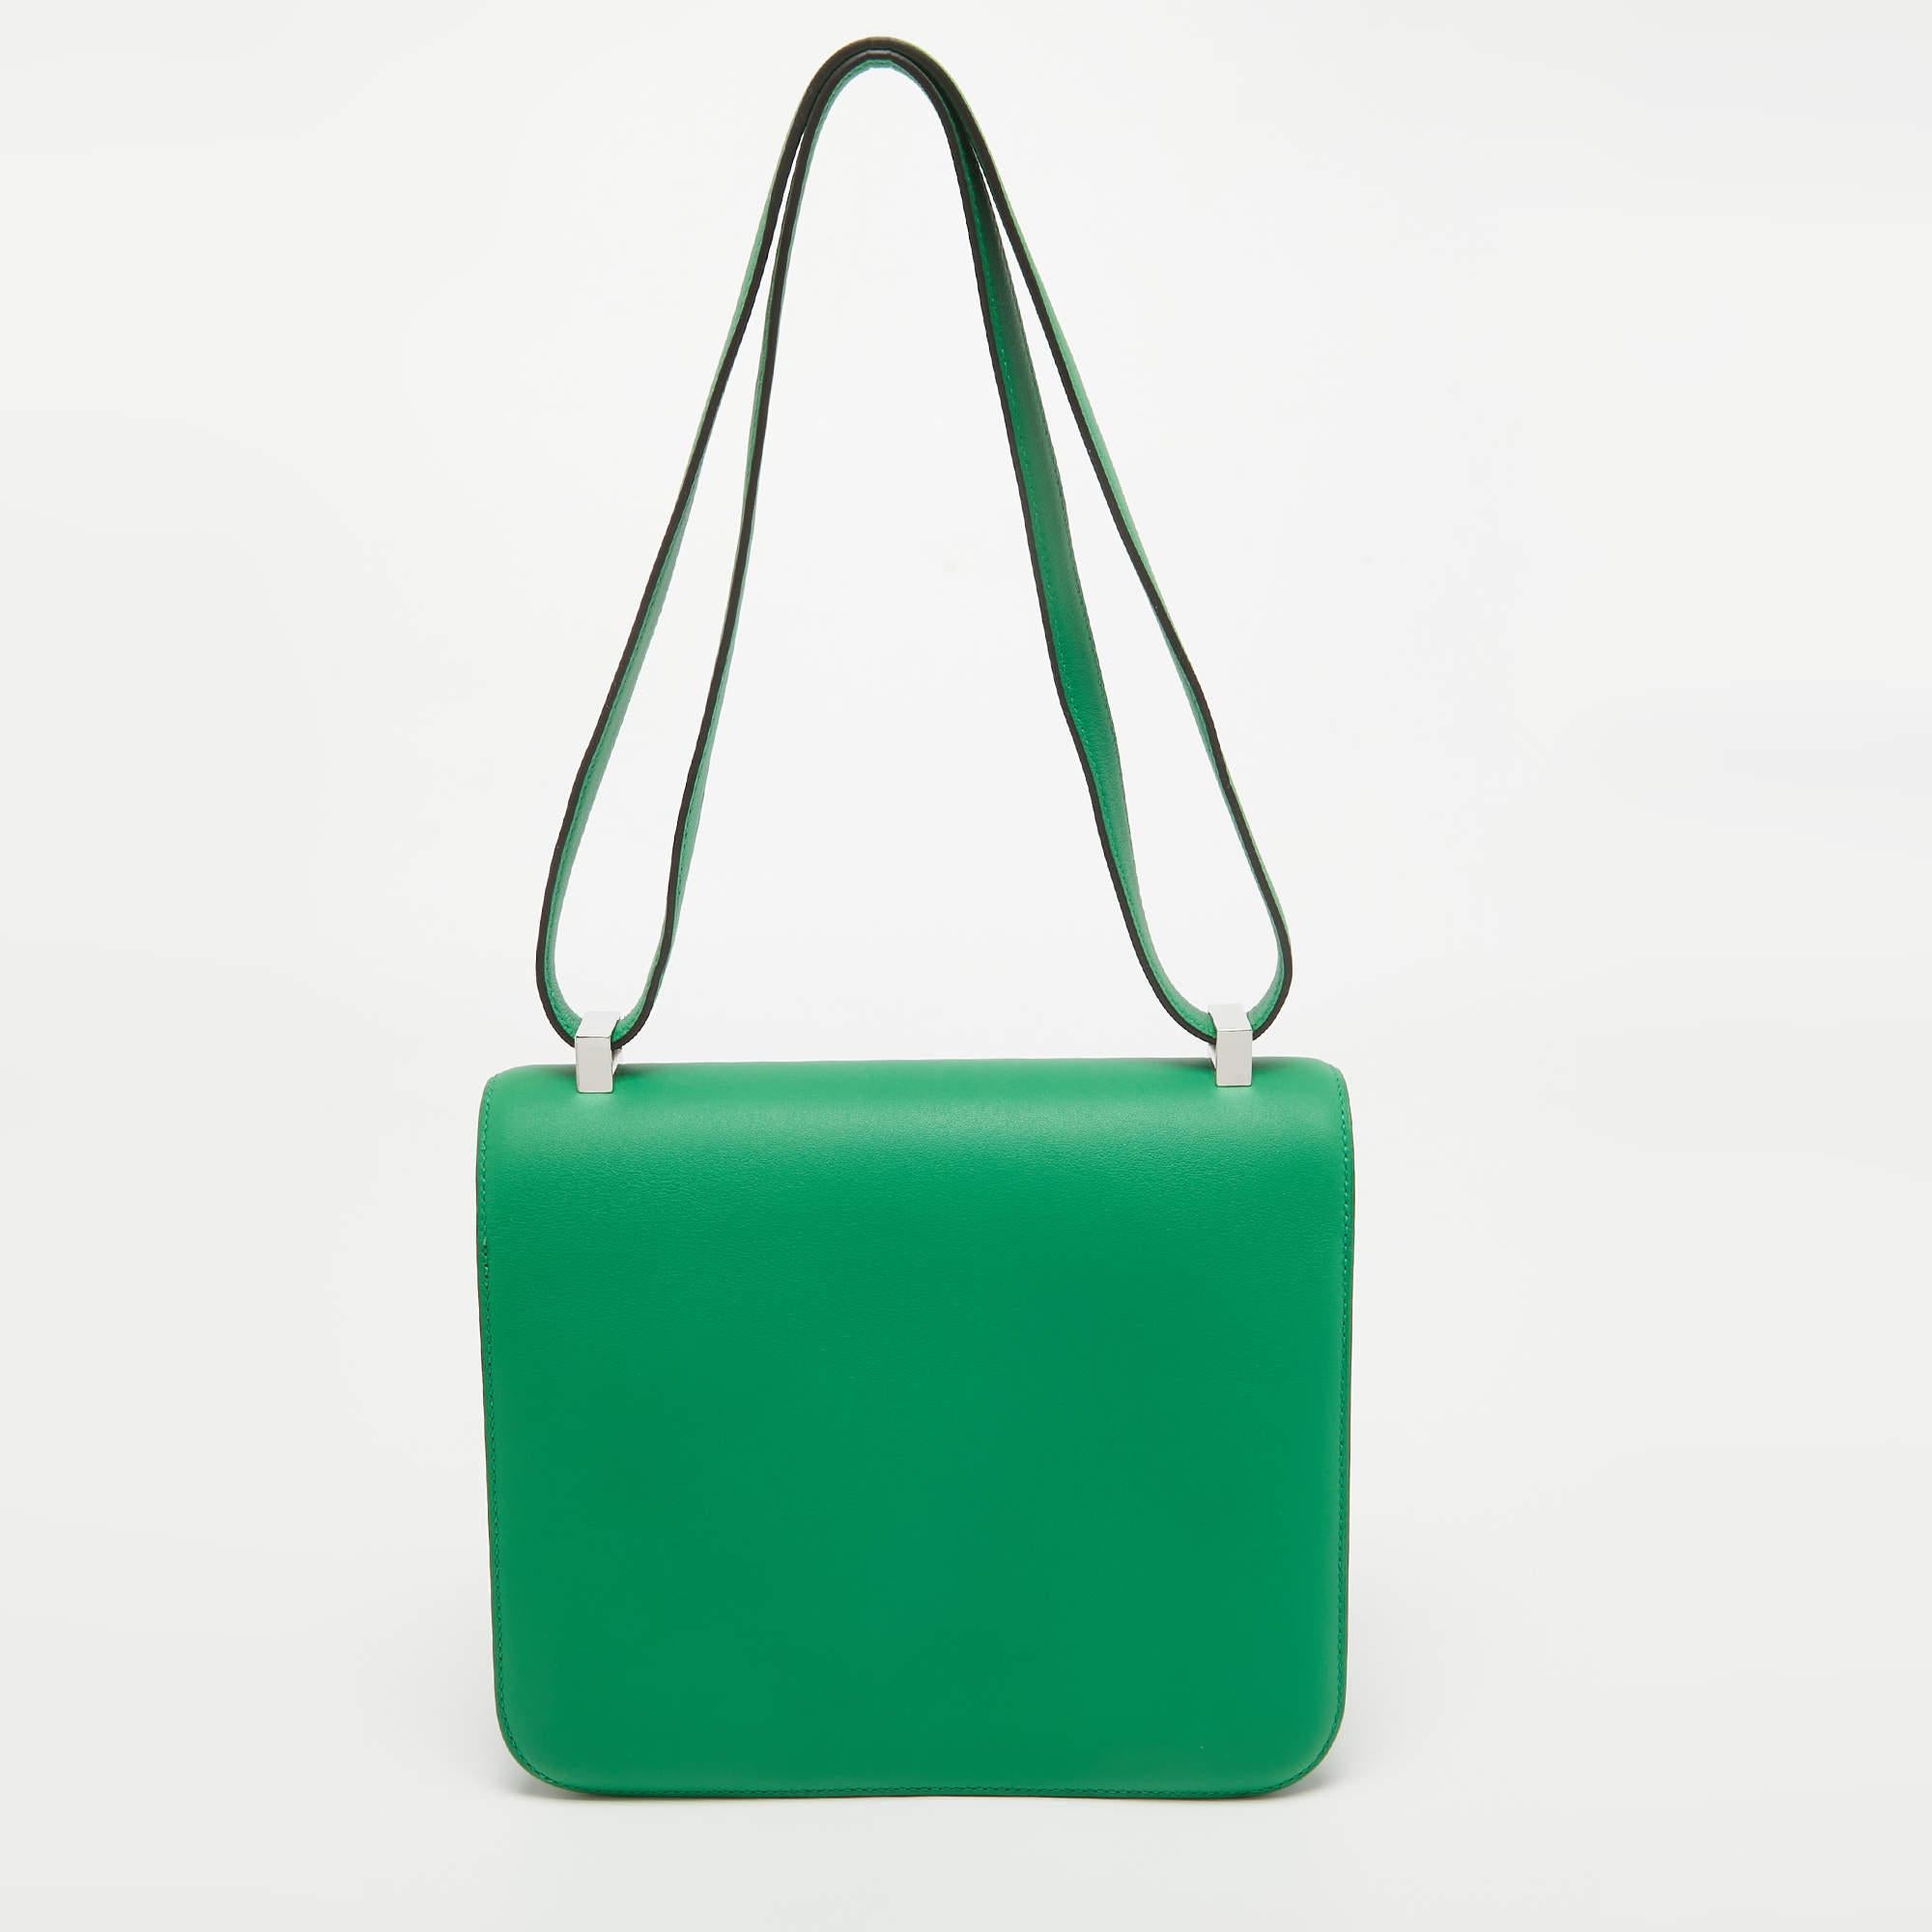 The Hermès Constance Bag features exquisite craftsmanship with a sleek bamboo green hue in supple Swift leather. Accented by Palladium finish hardware, its iconic H-shaped clasp opens to a compact interior, making it a timeless and sophisticated